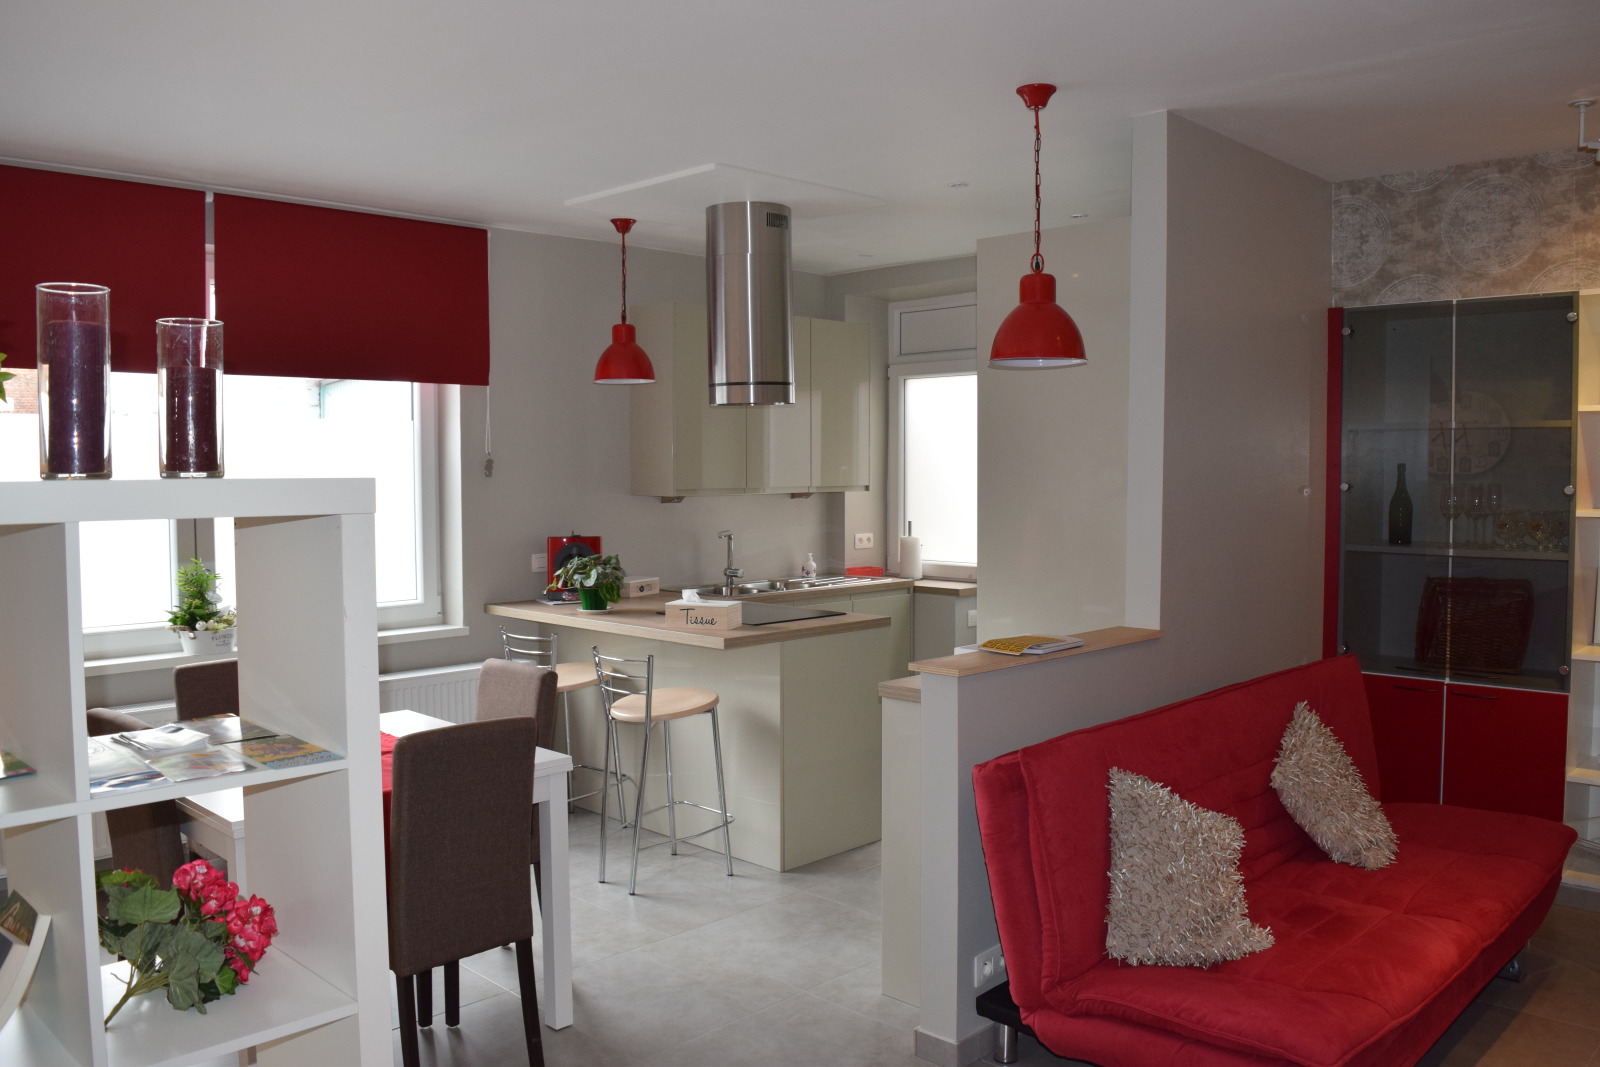 Kitchen and living room of the 7 Heures holiday rental in Spa